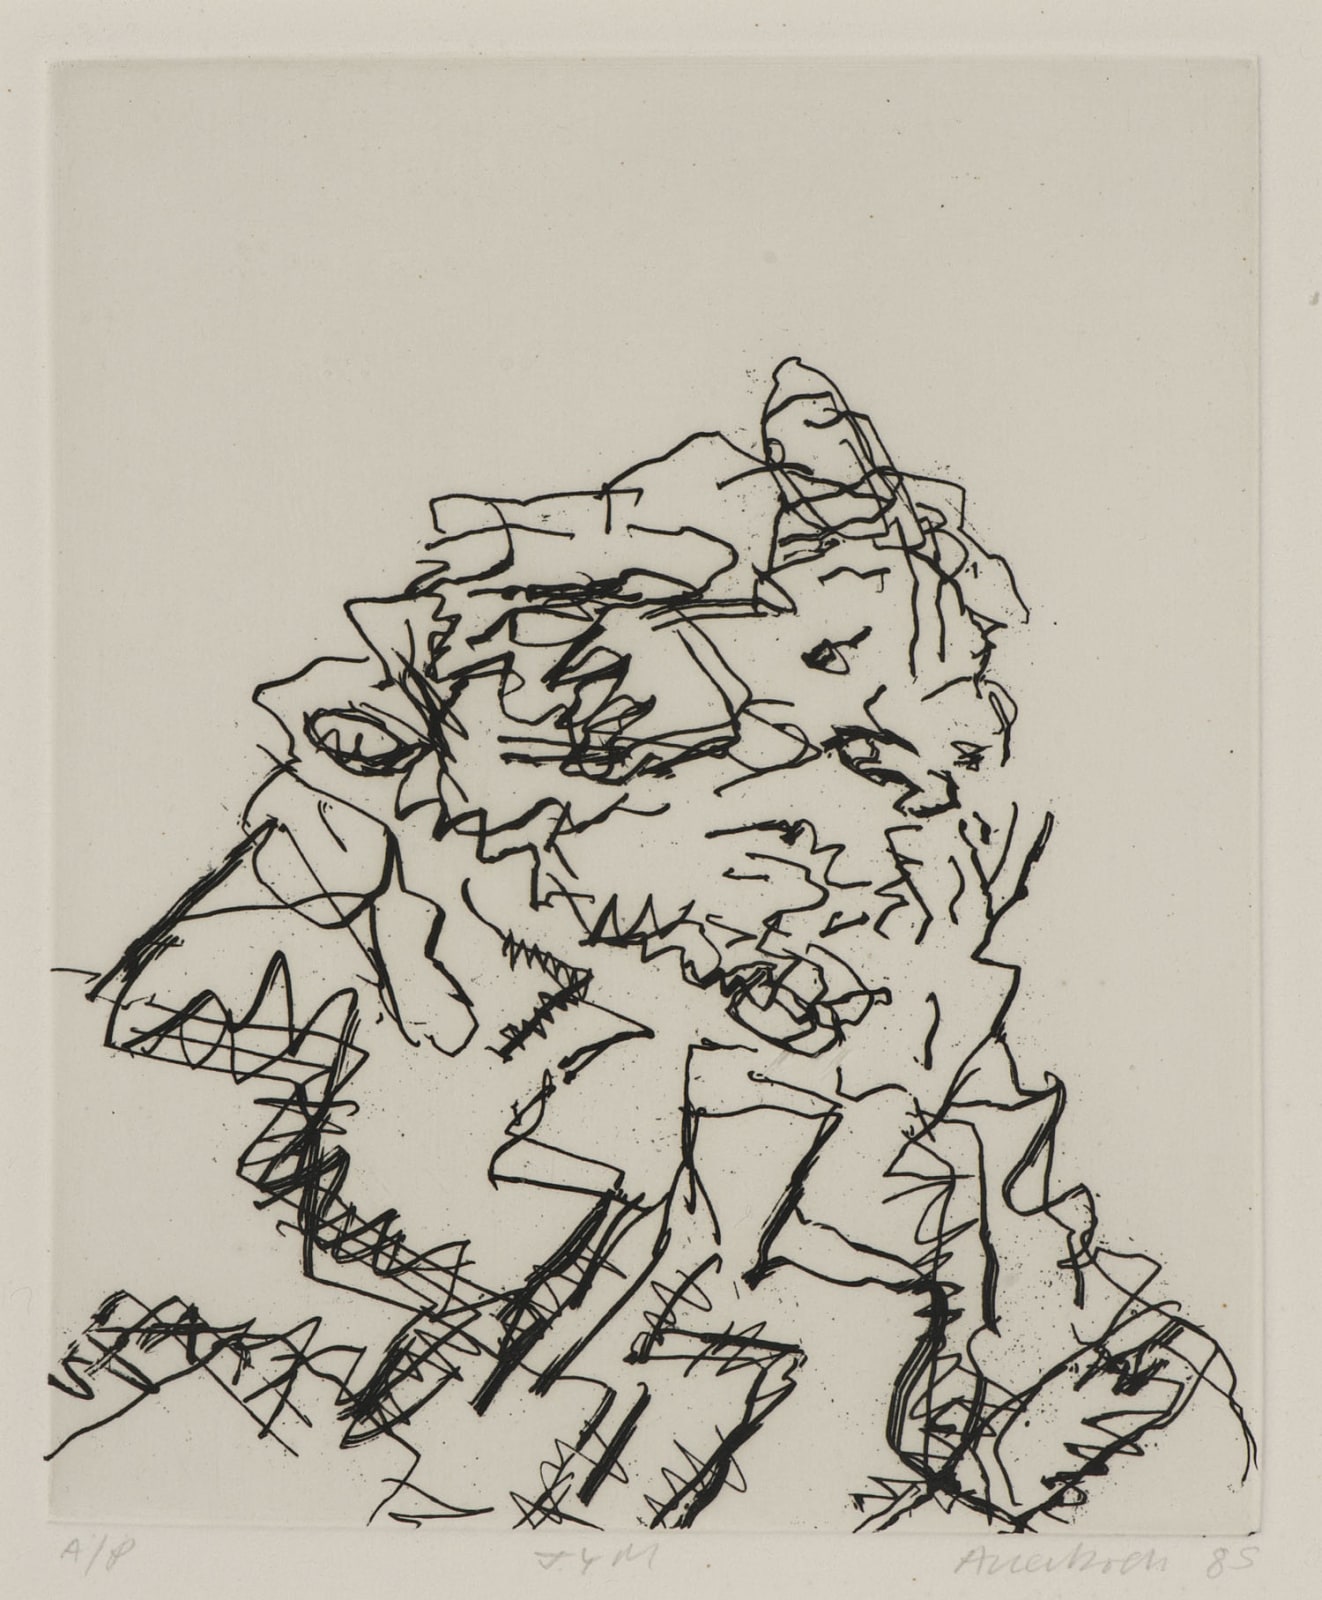 Frank Auerbach (1931-) J.Y.M (part of seven portraits) 1989 Etching, printed on Somerset white paper, artist's proof outside the published edition of 50 20 x 16.5 cm Ben Uri Collection © Frank Auerbach, courtesy Marlborough Fine Art To see and discover more about this artist click here